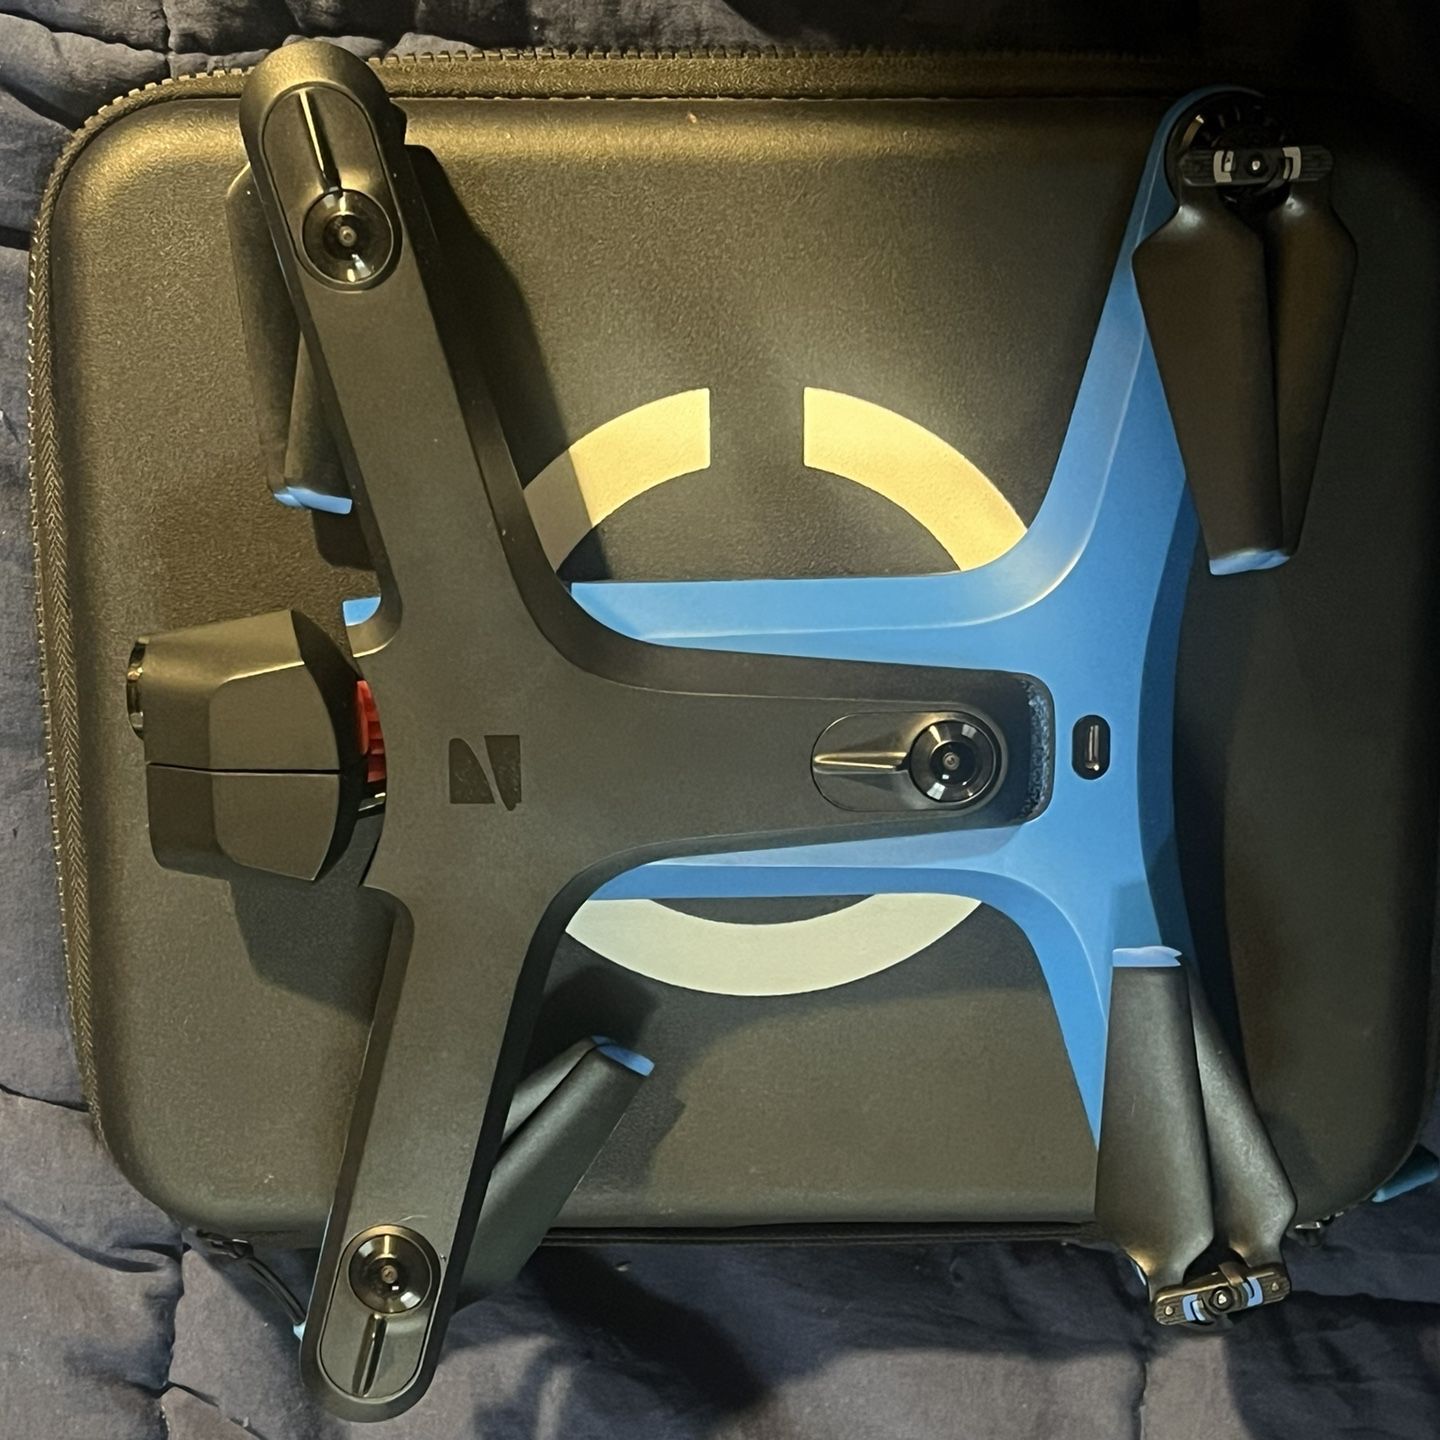 Skydio Drone Almost New